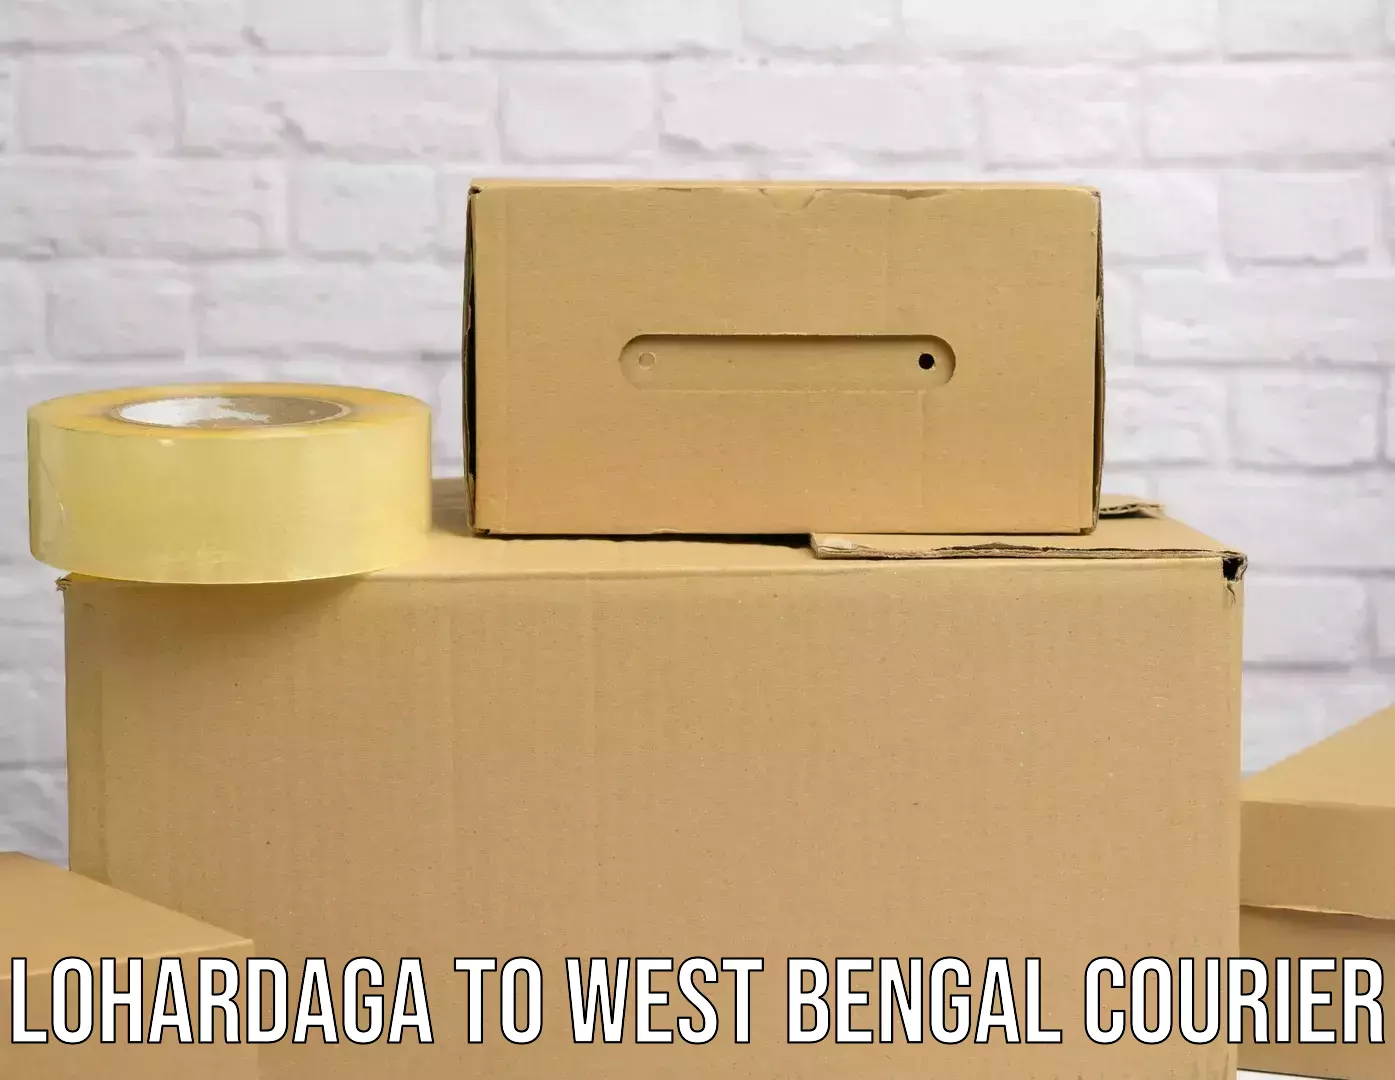 Reliable delivery network Lohardaga to West Bengal